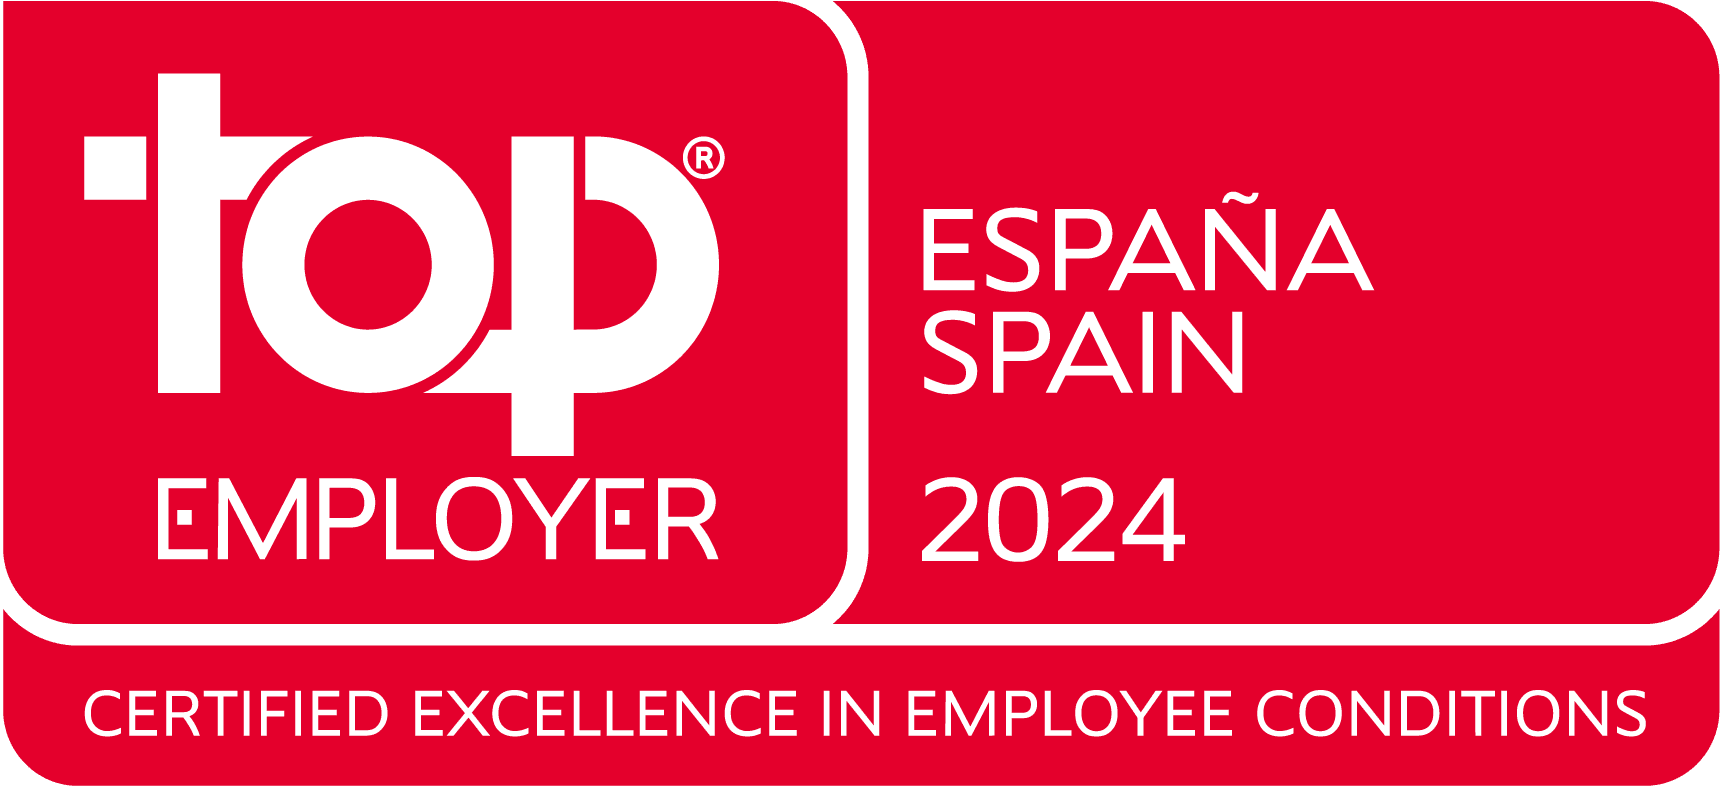 Top_Employer_Spain_2024_comp.png